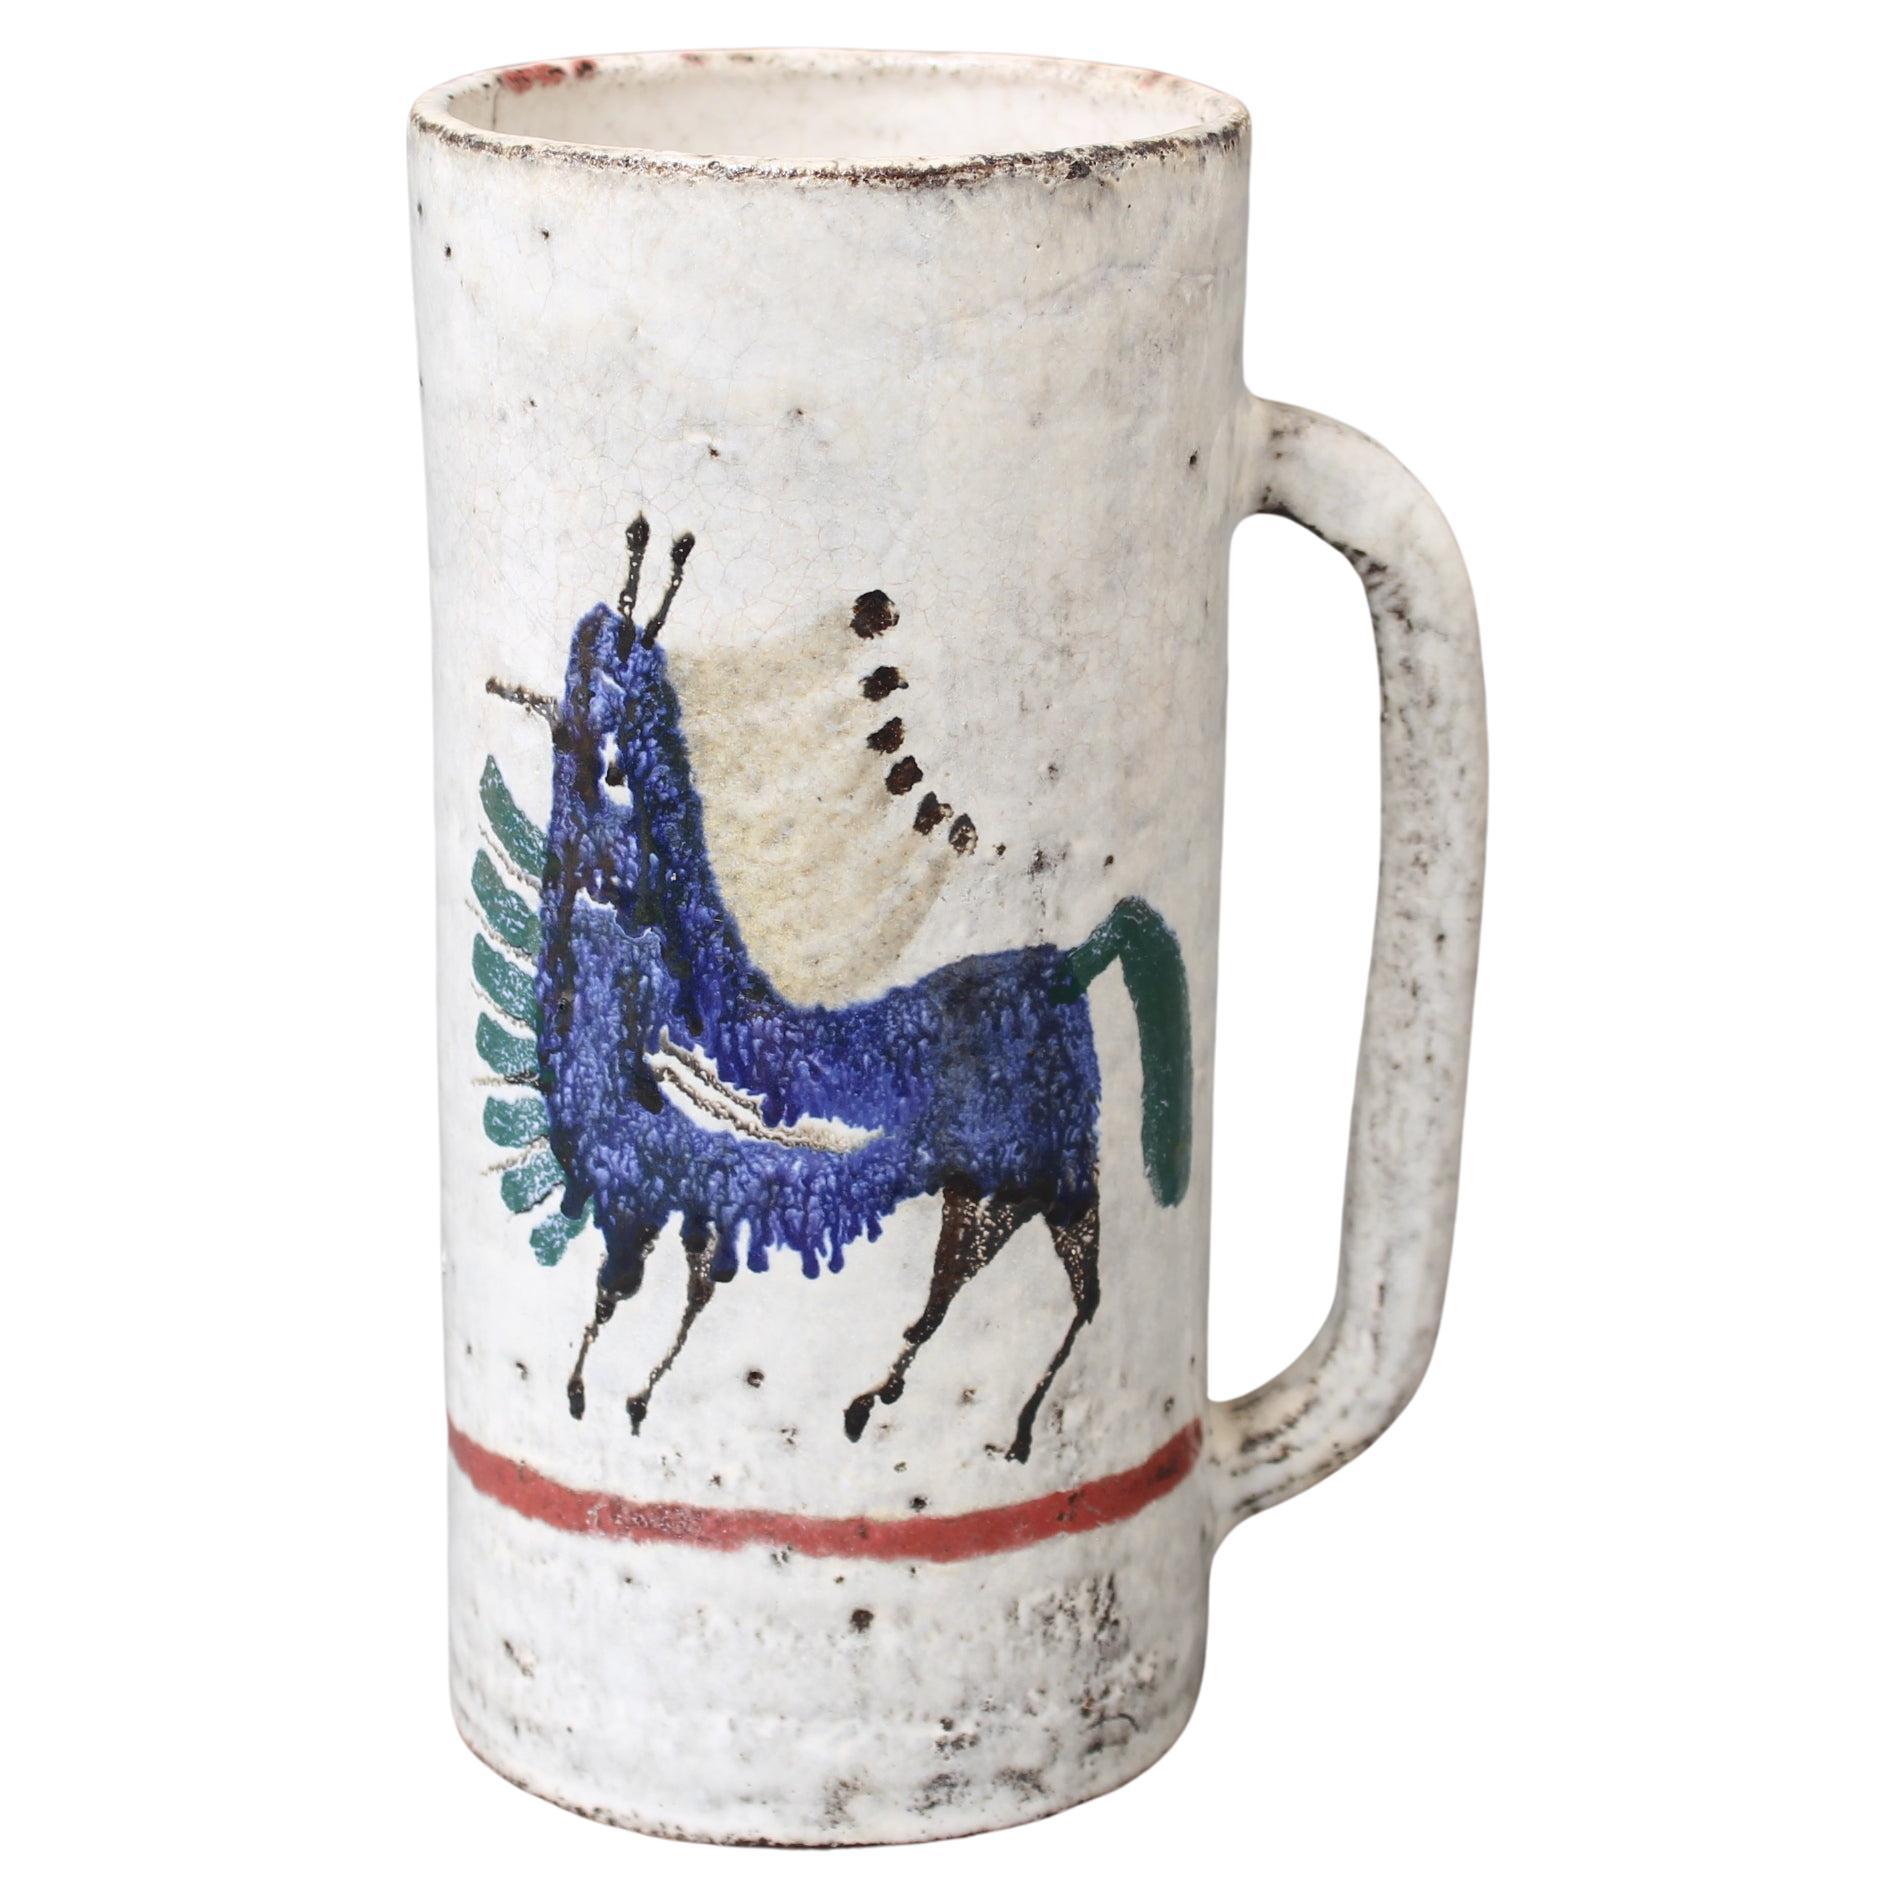 Vintage French Ceramic Decorative Stein by Gustave Reynaud for Le Mûrier Studio 